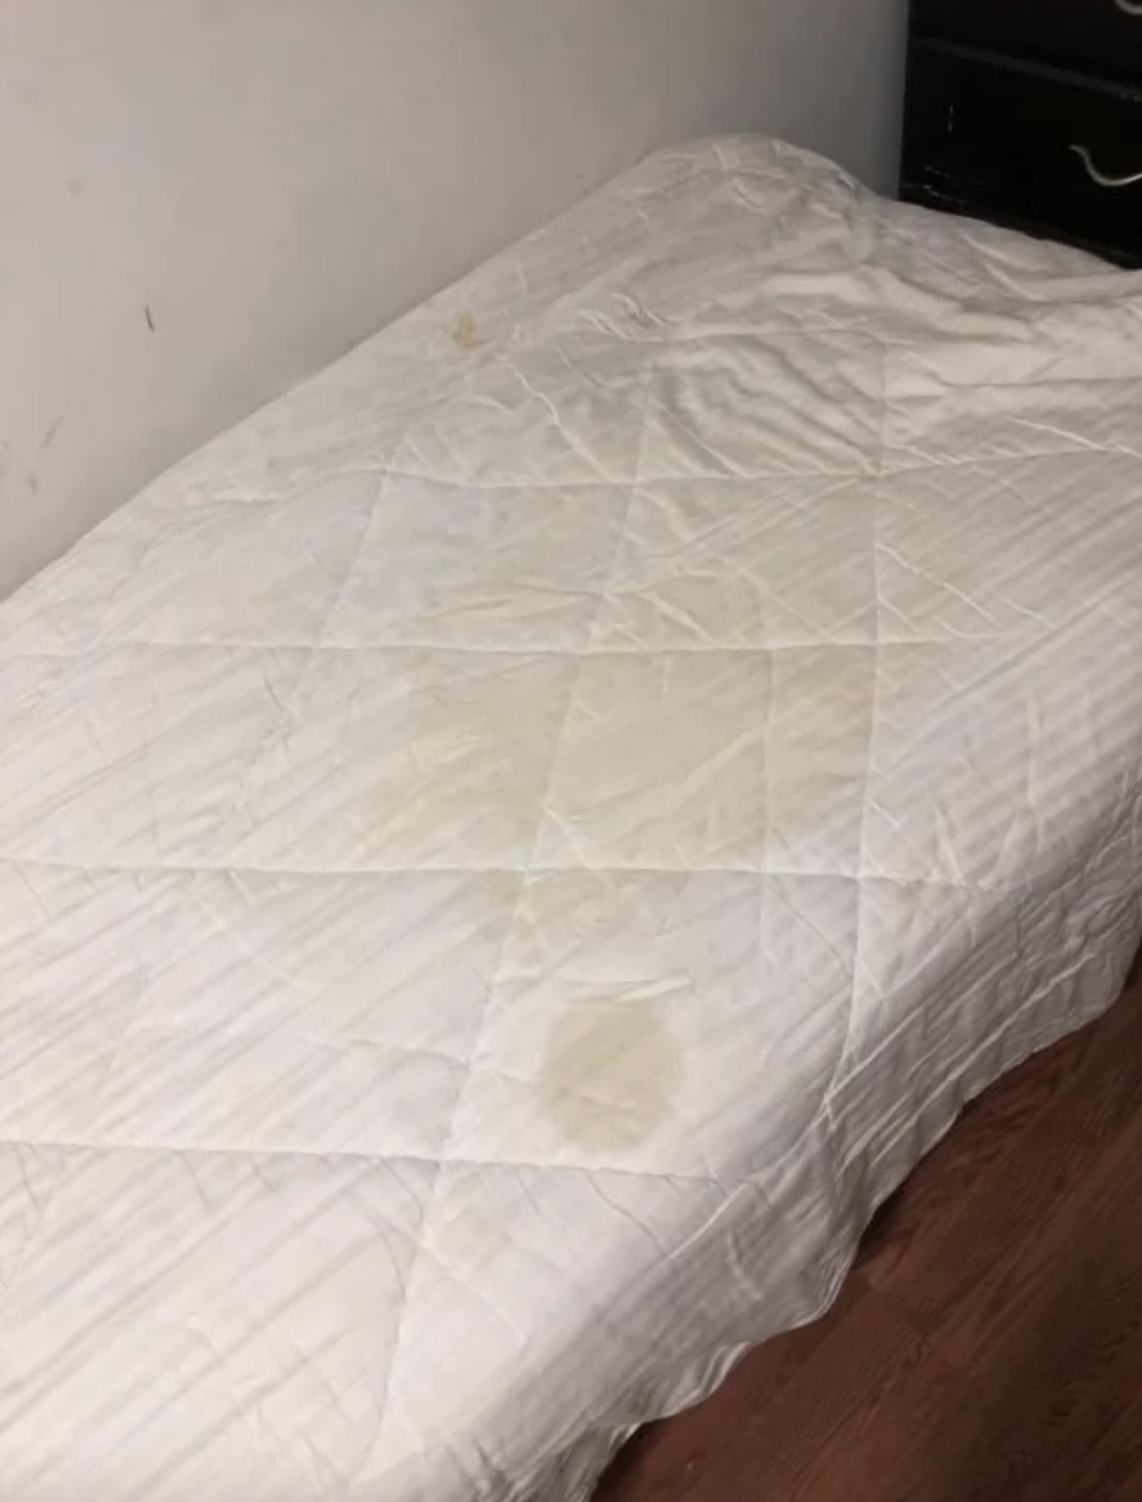 There are huge, gross-looking stains covering nearly half the bed